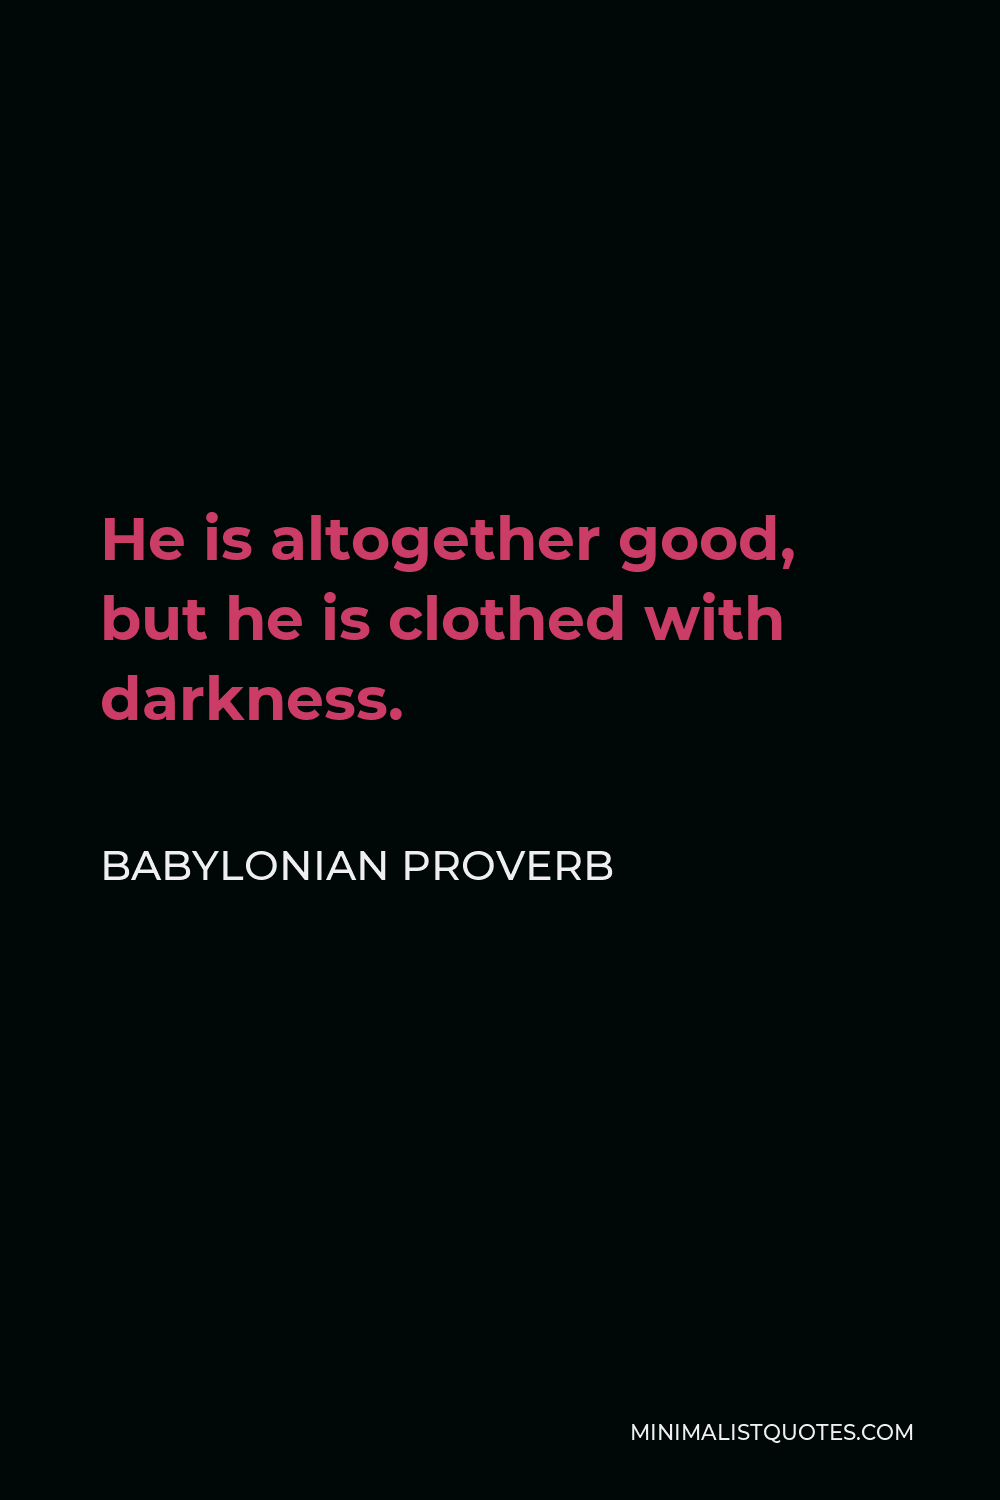 Babylonian Proverb Quote - He is altogether good, but he is clothed with darkness.